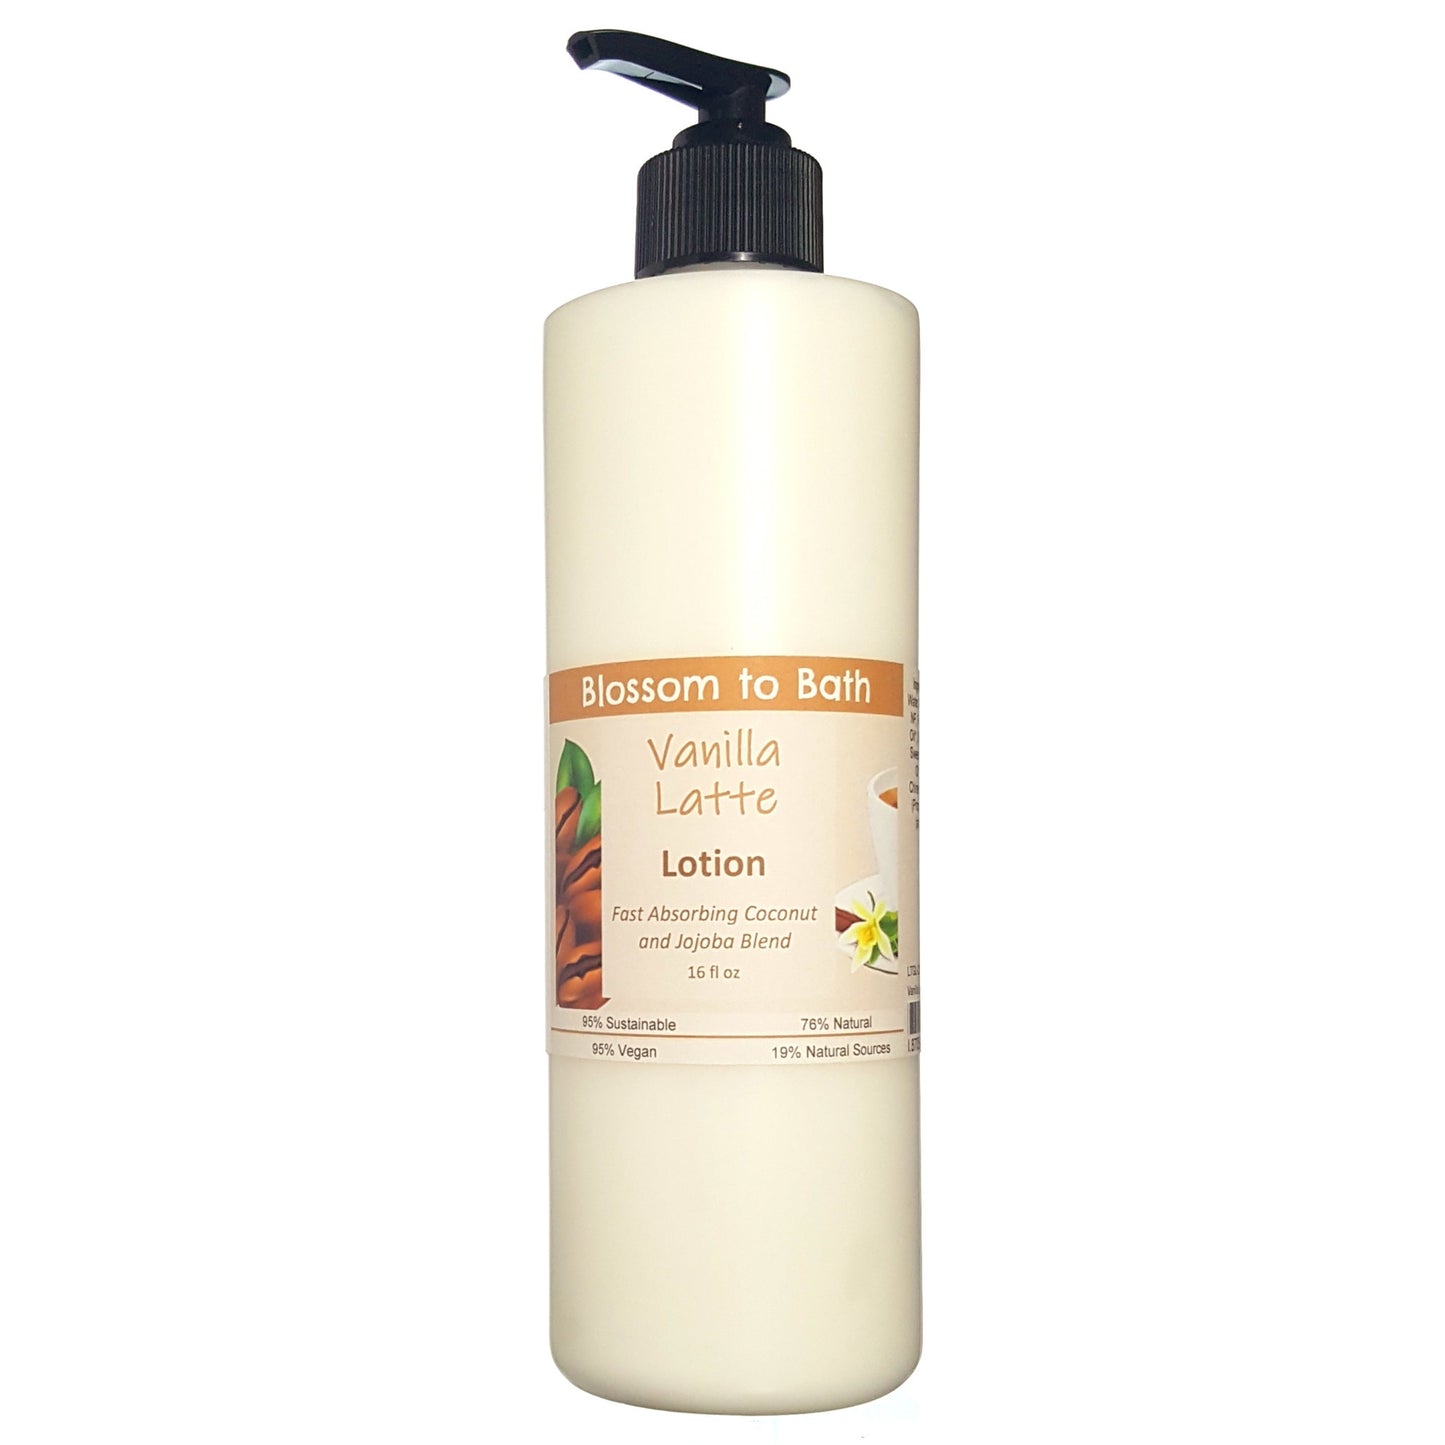 Buy Blossom to Bath Vanilla Latte Lotion from Flowersong Soap Studio.  Daily moisture luxury that soaks in quickly made with organic oils and butters that soften and smooth the skin  Sweetened vanilla combines with rich coffee to form the classic latte scent.